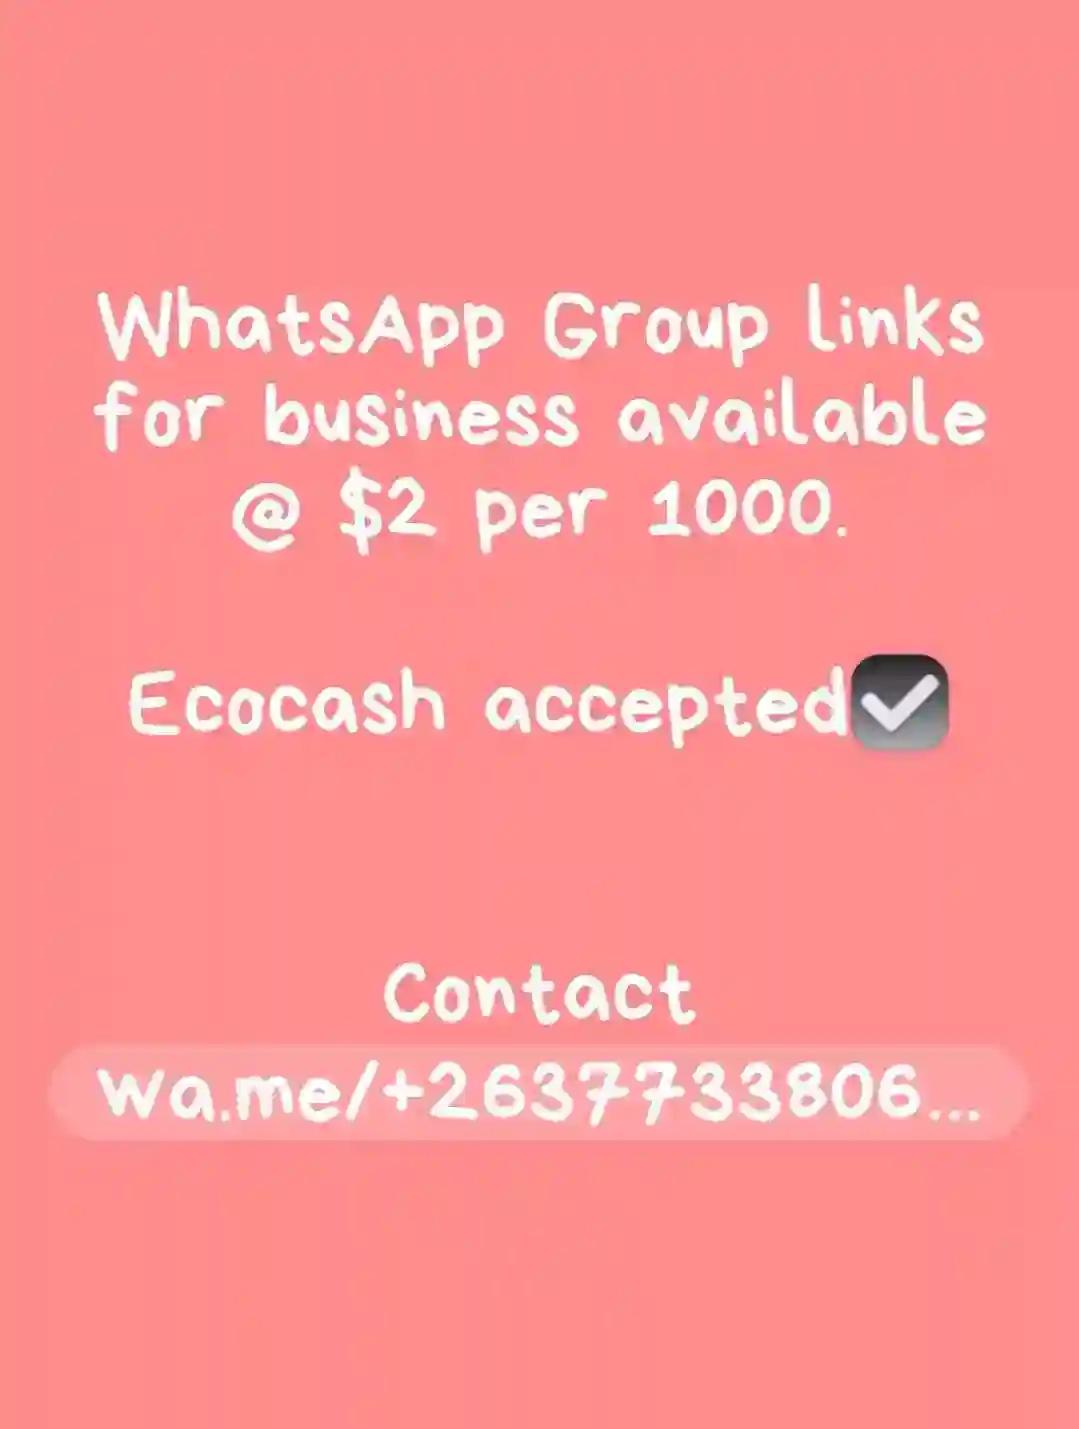 WhatsApp Group Links for business.